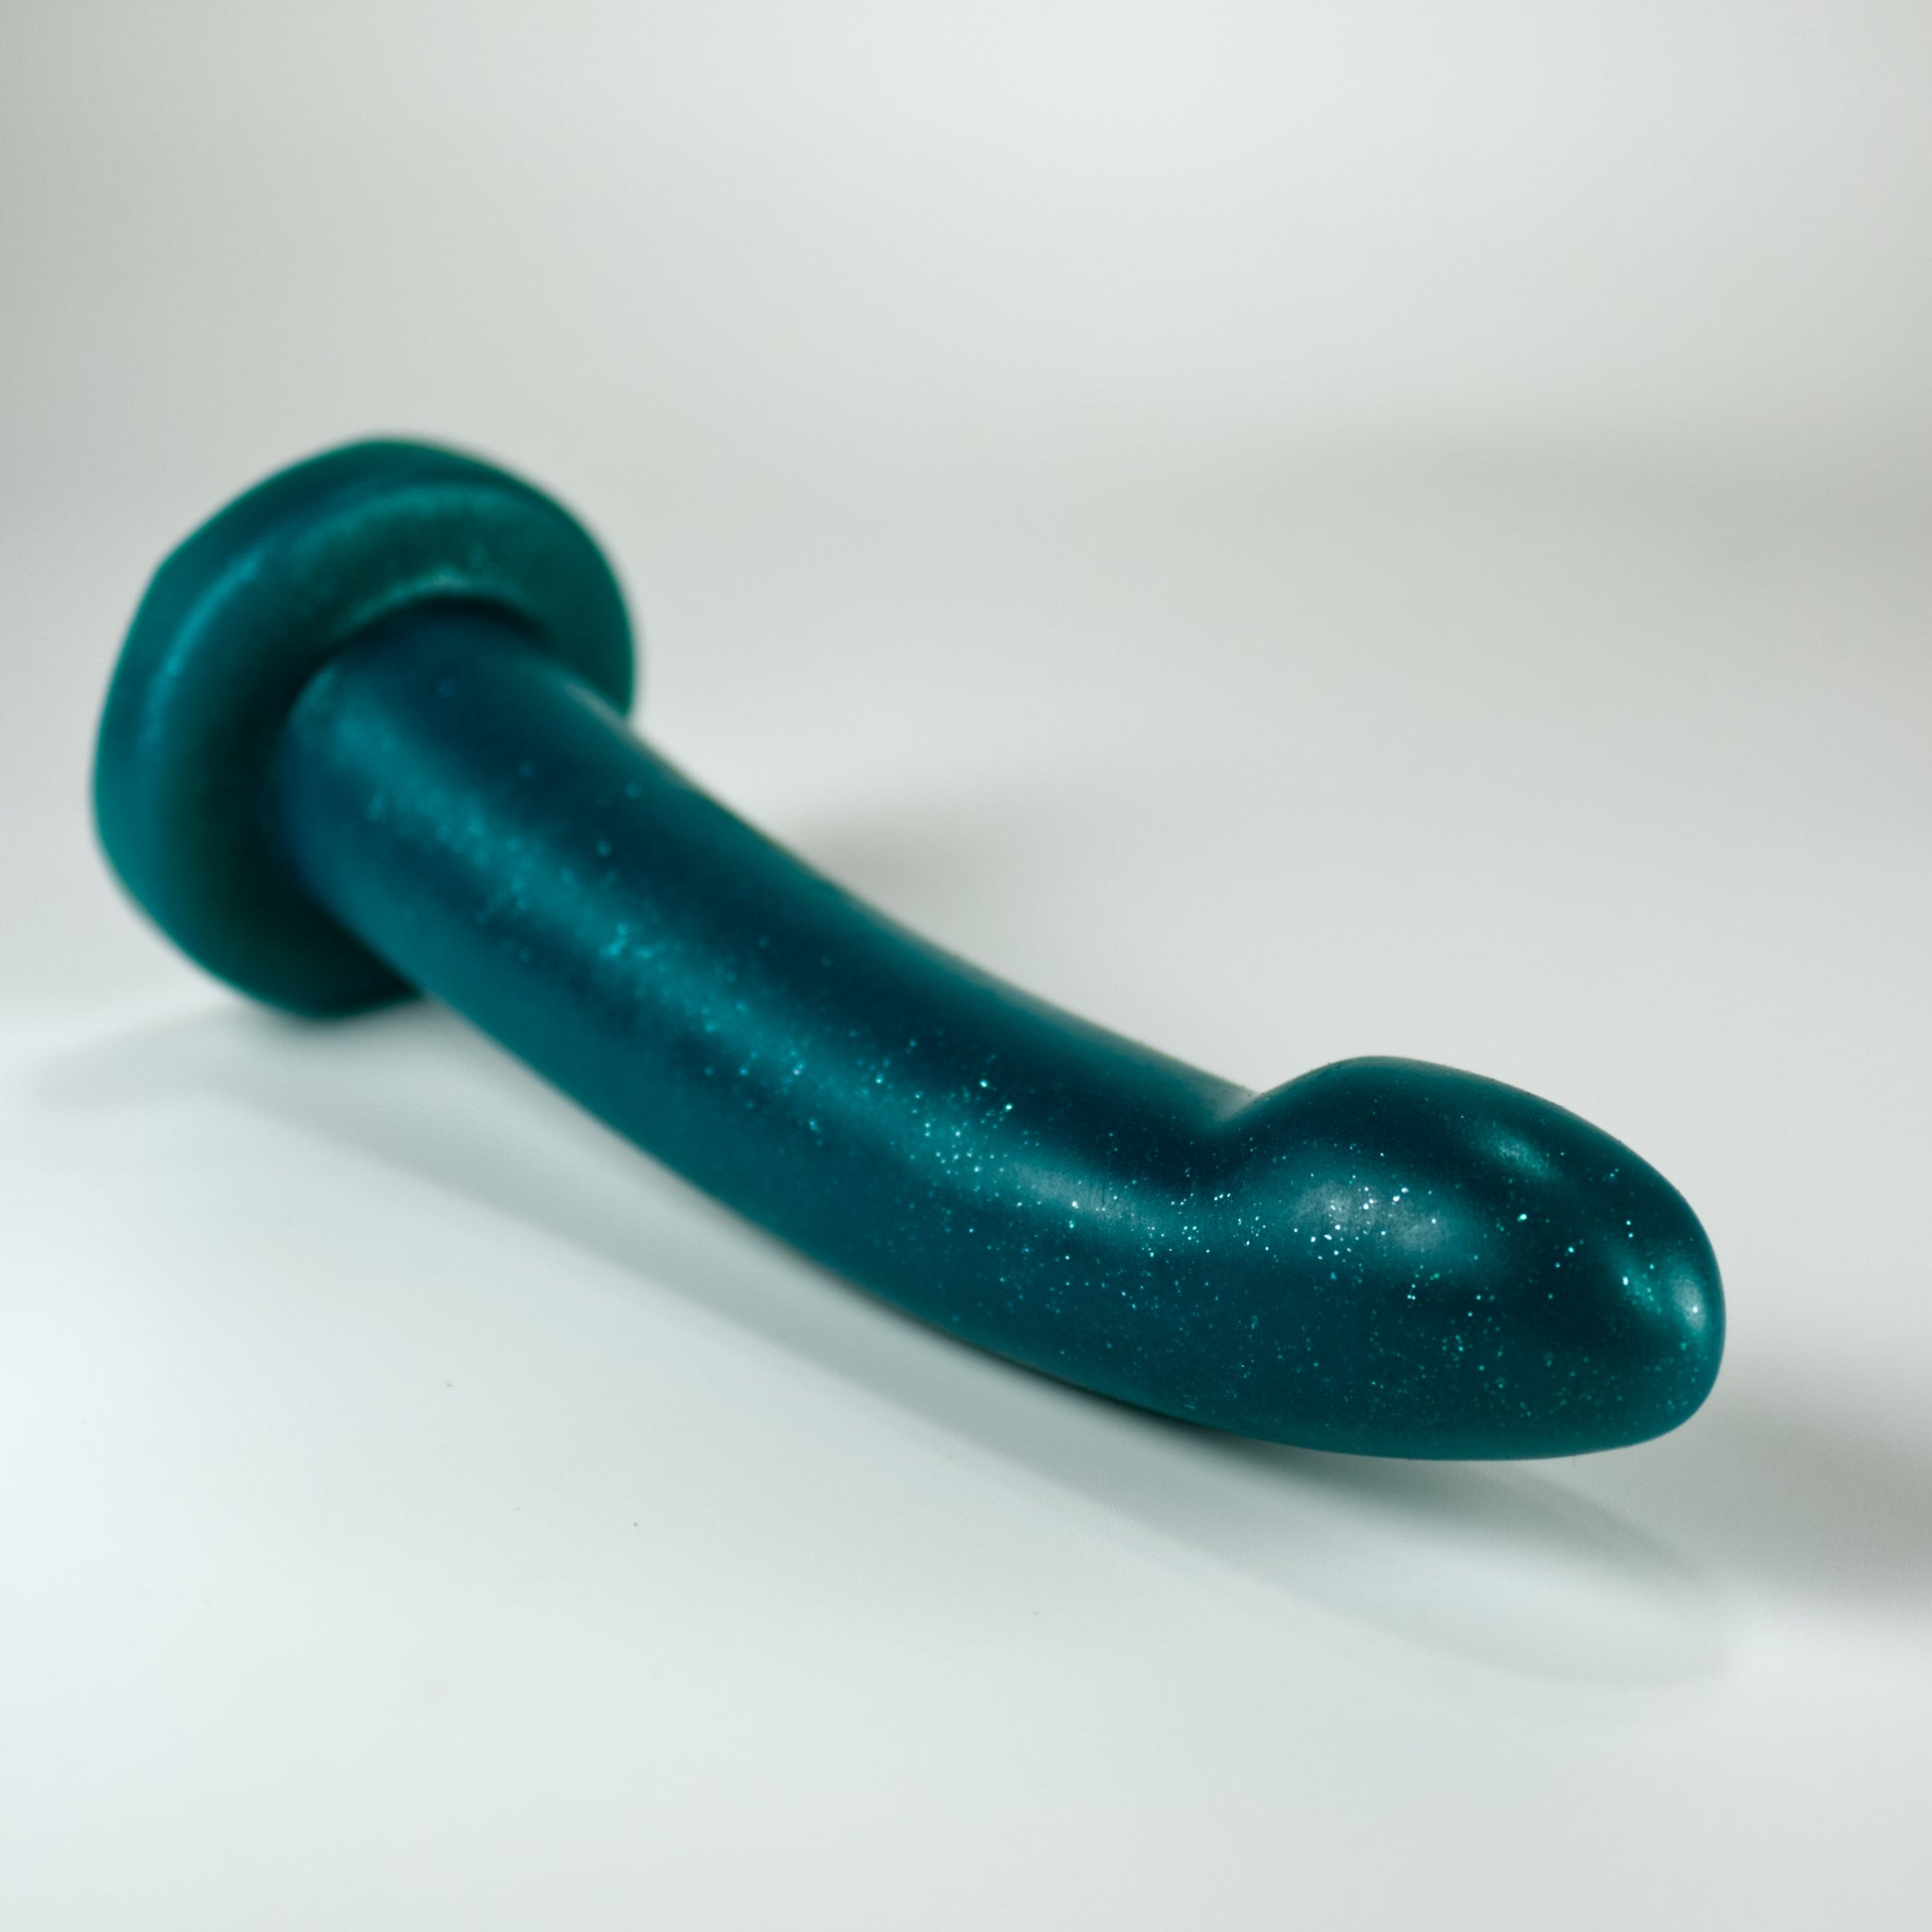 Top view of the Sidekick Extra Small, a dildo with a smooth cylinder shaped body, and a fingertip-shaped tip, and a pronounced cliff shape where they meet.